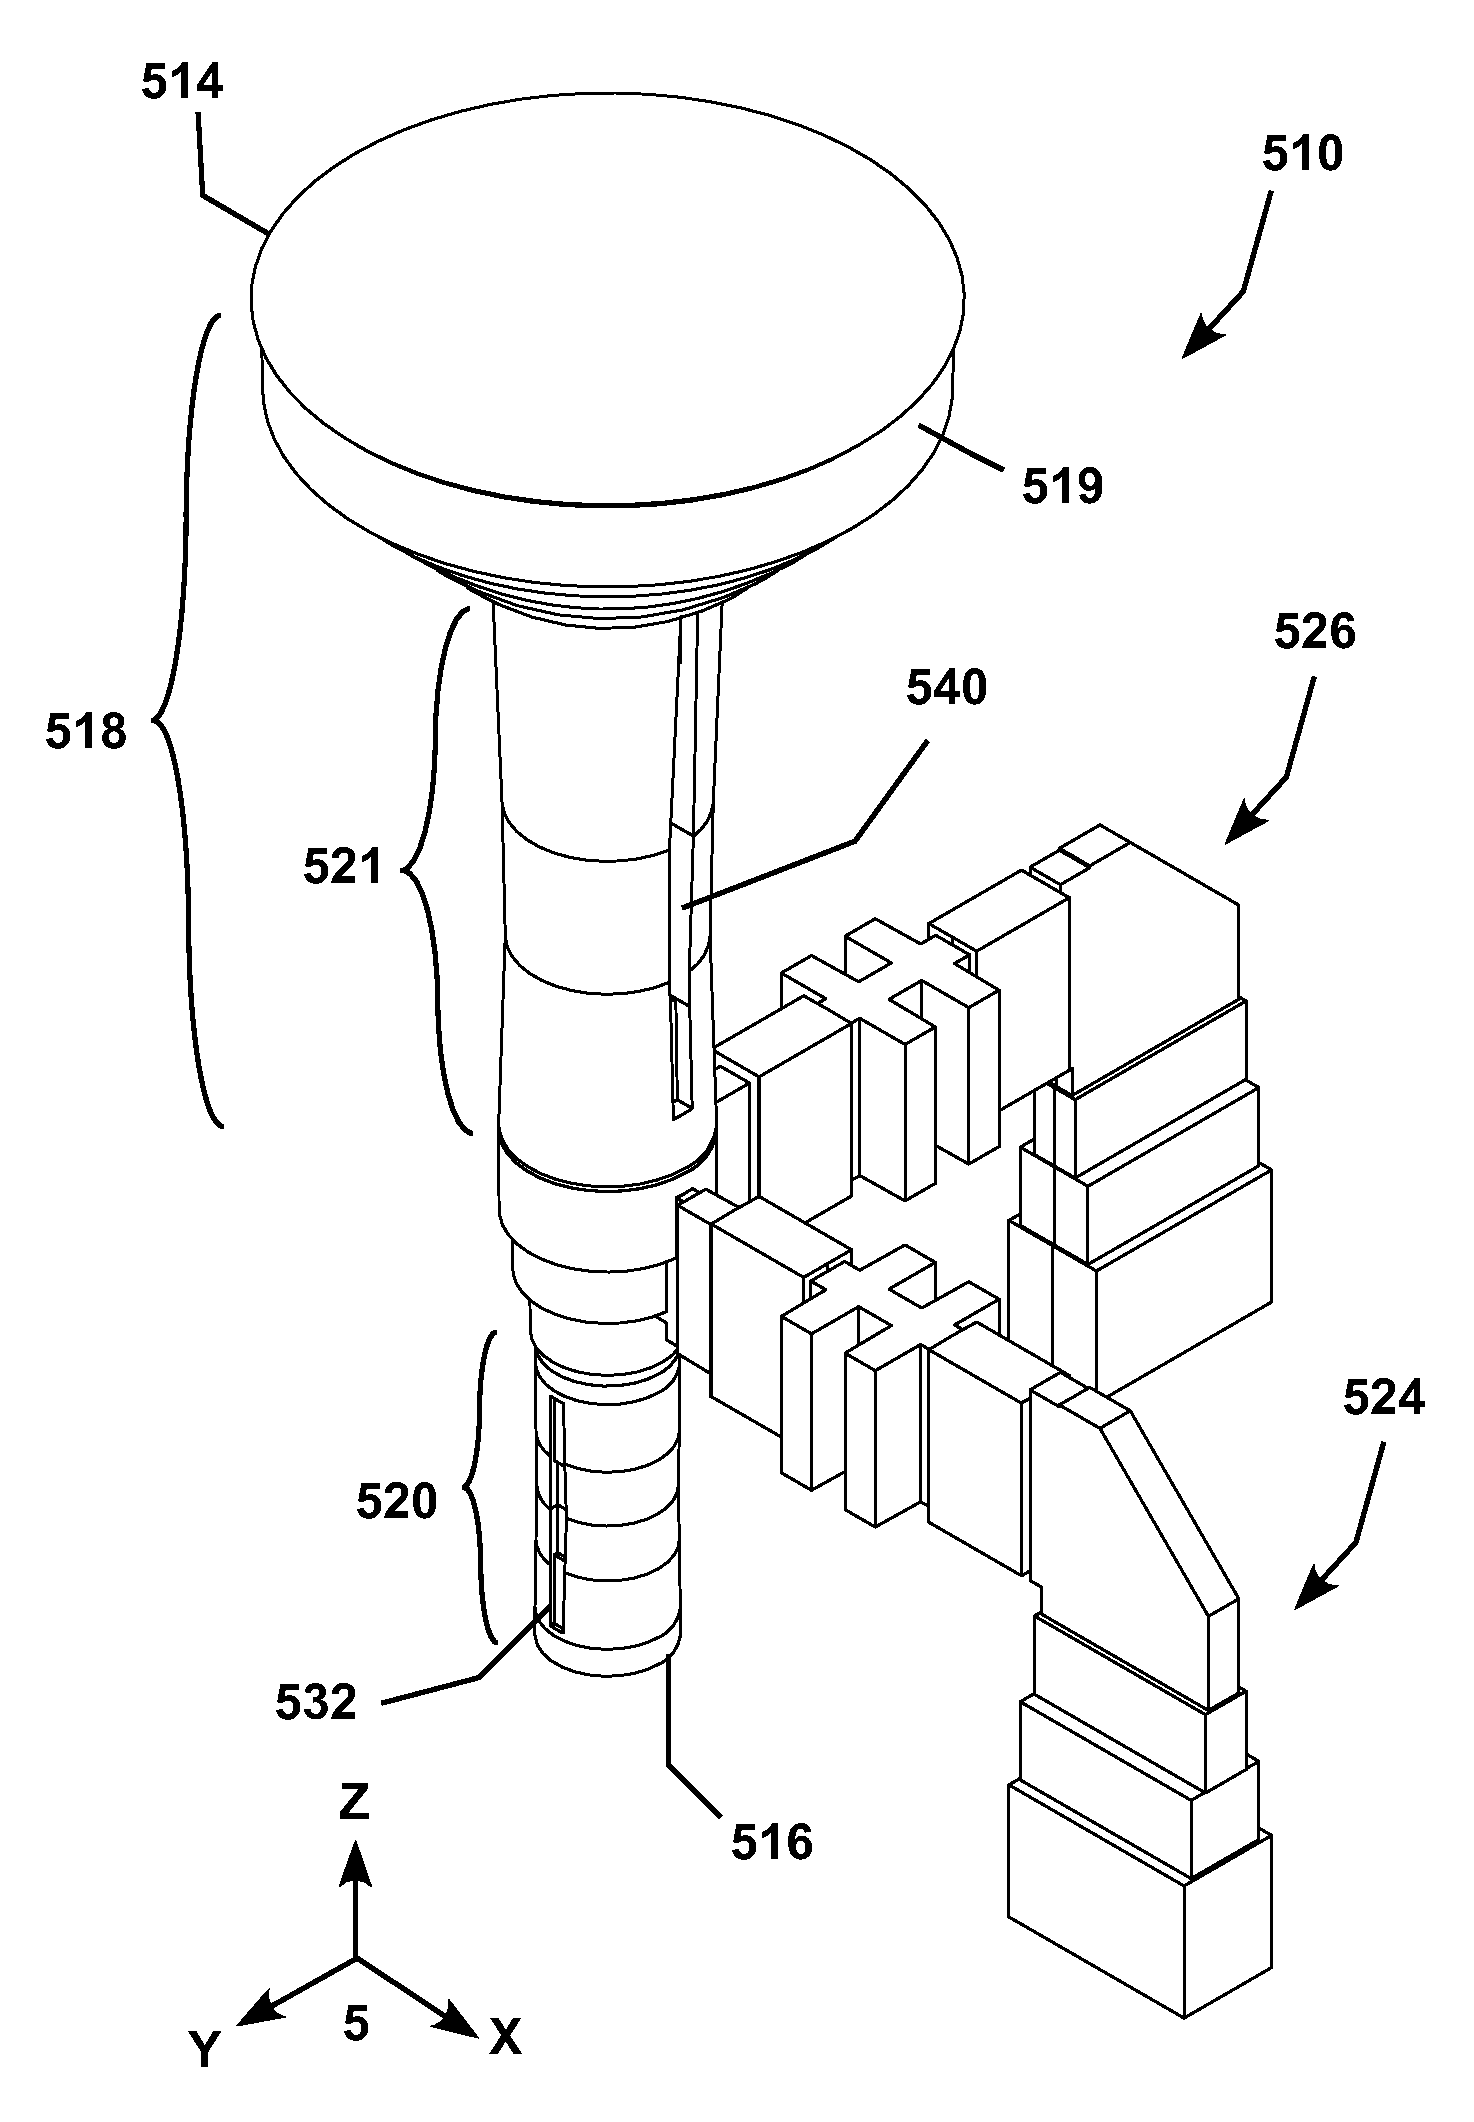 Multi-band antenna for simultaneously communicating linear polarity and circular polarity signals